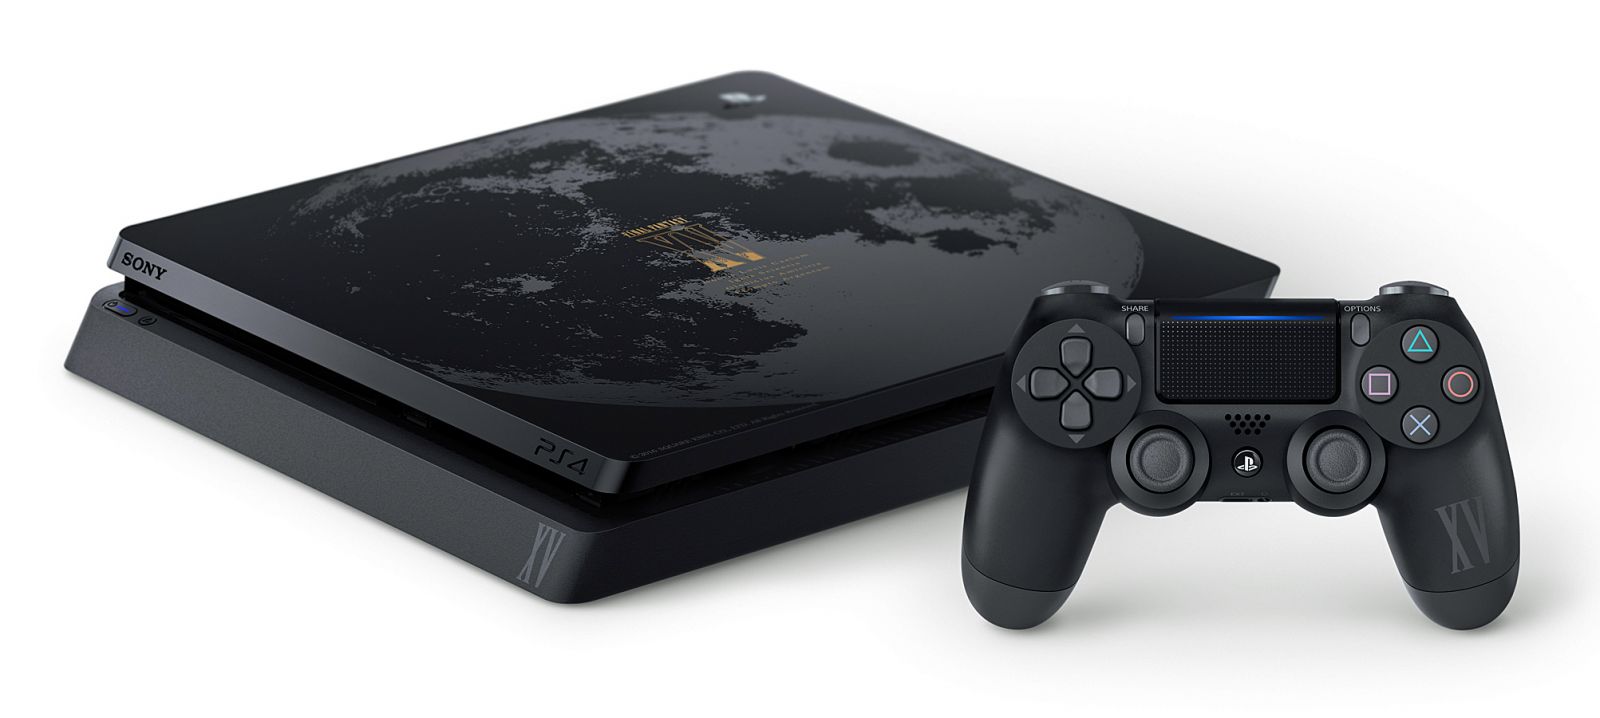 Sony announces limited edition Final Fantasy XV PlayStation 4 